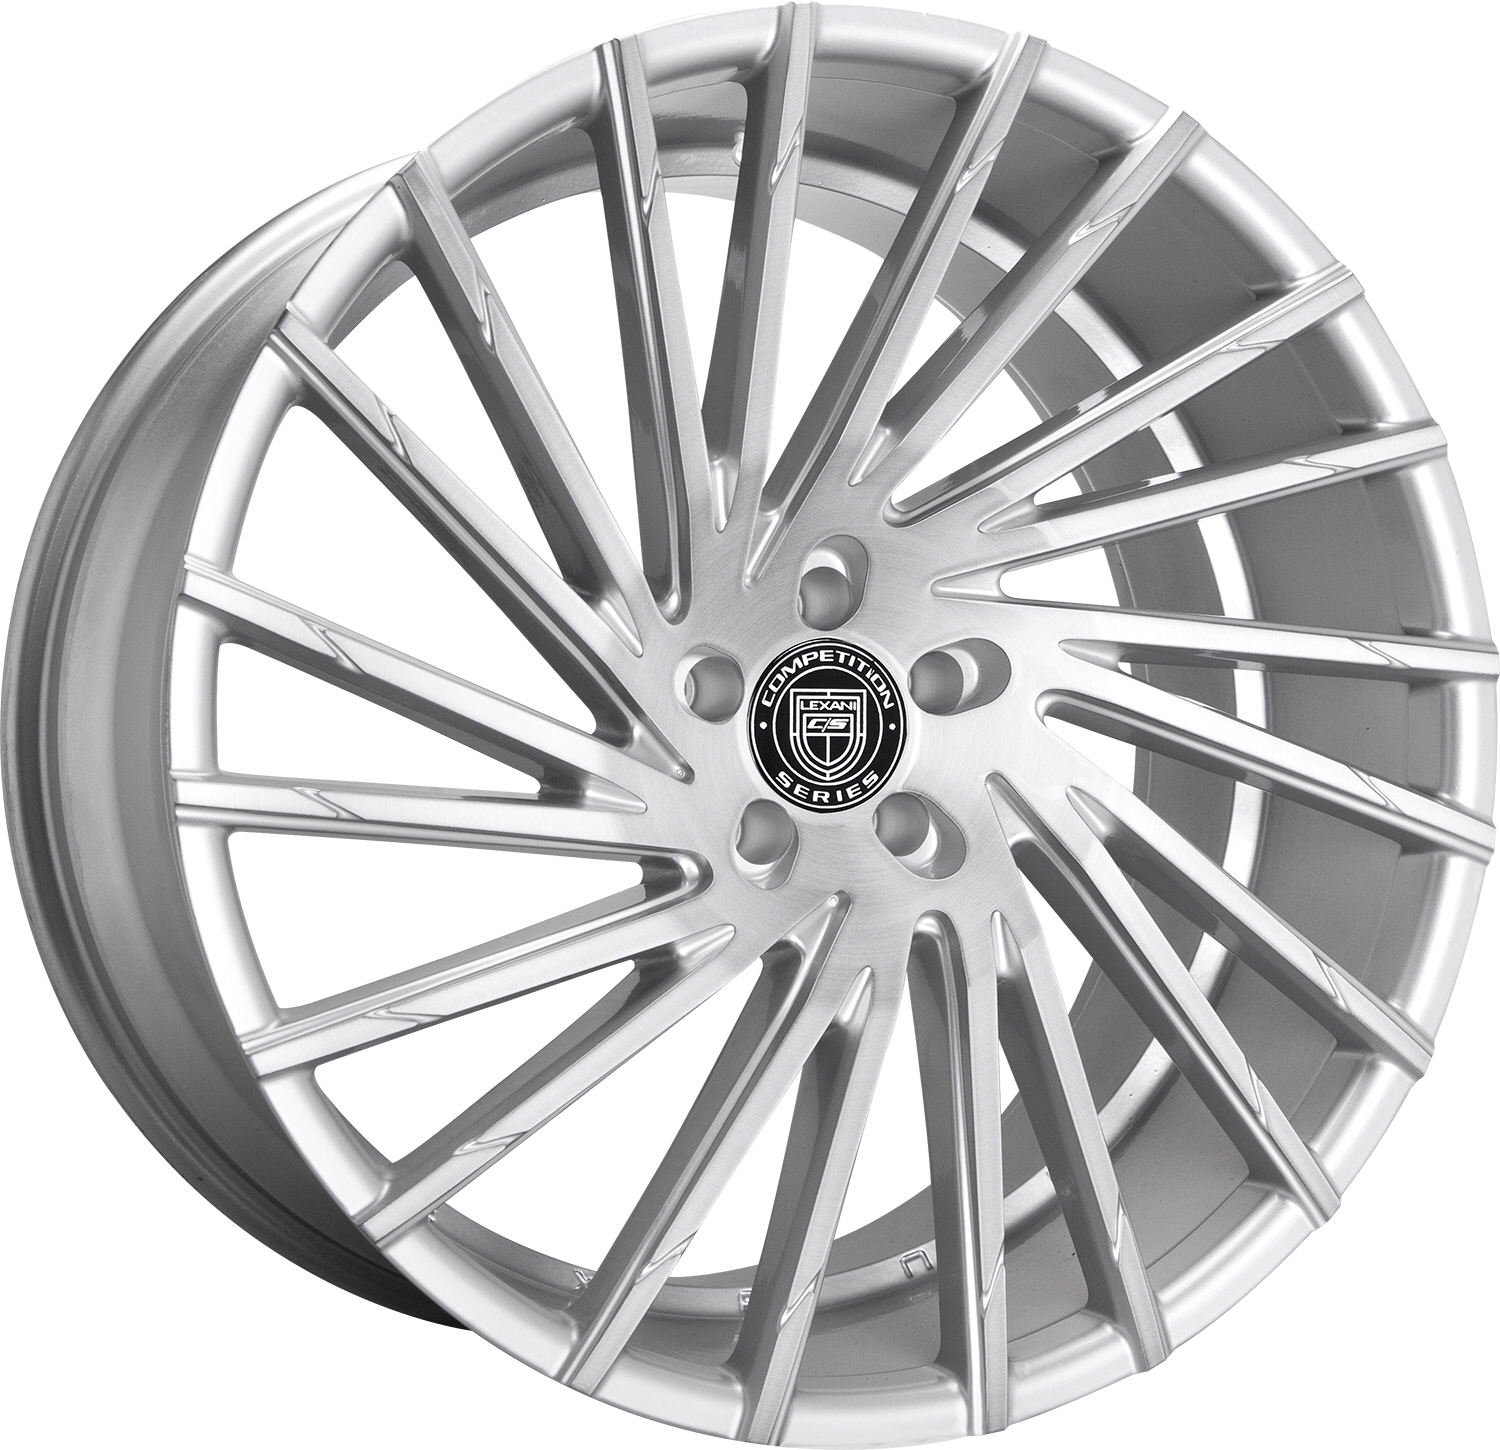 663 - WRAITH  WHEELS AND RIMS PACKAGES